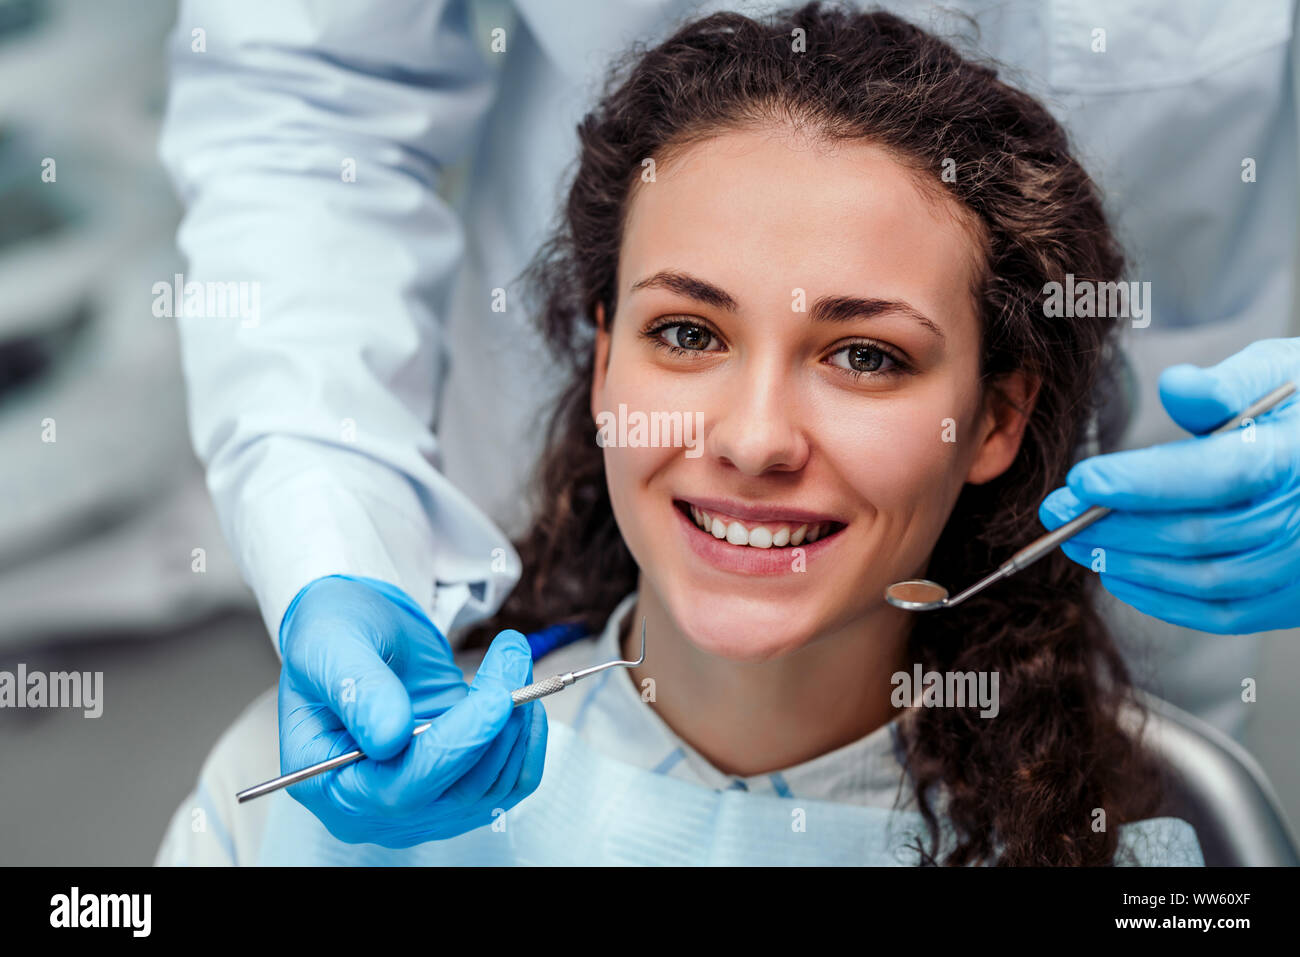 Health check. Dentist in stomatology center is making an examination of girl teeth by using dental tools. Stock Photo